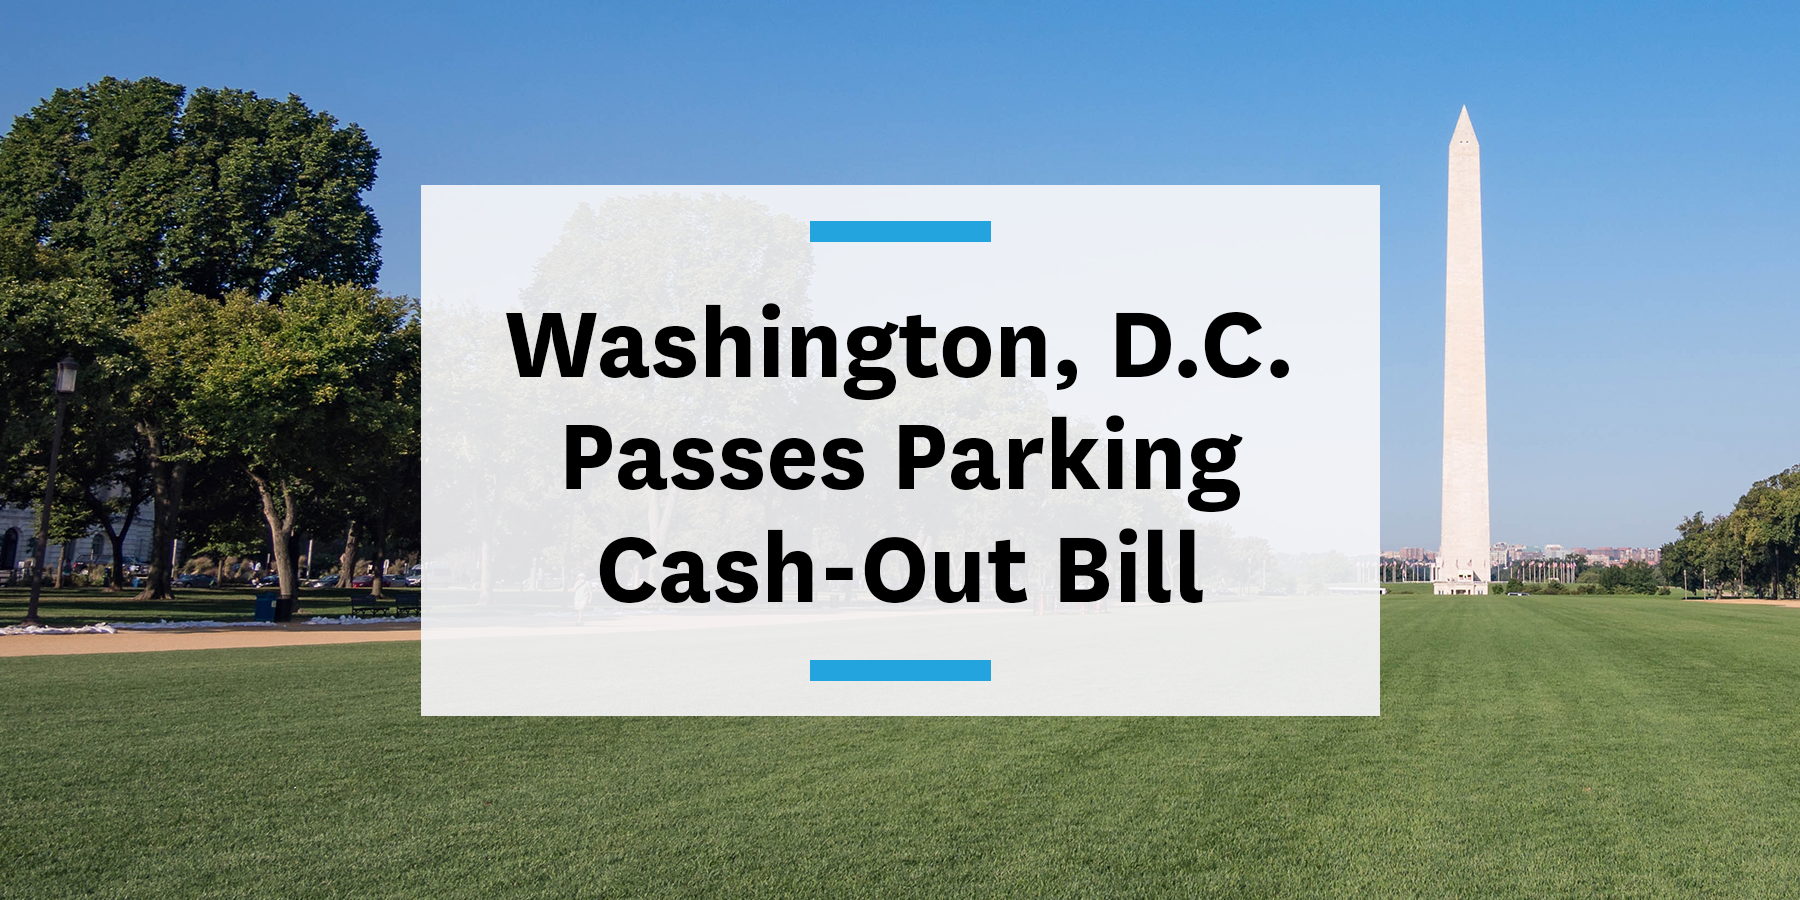 Feature image for Washington, D.C. passed parking cash-out bill